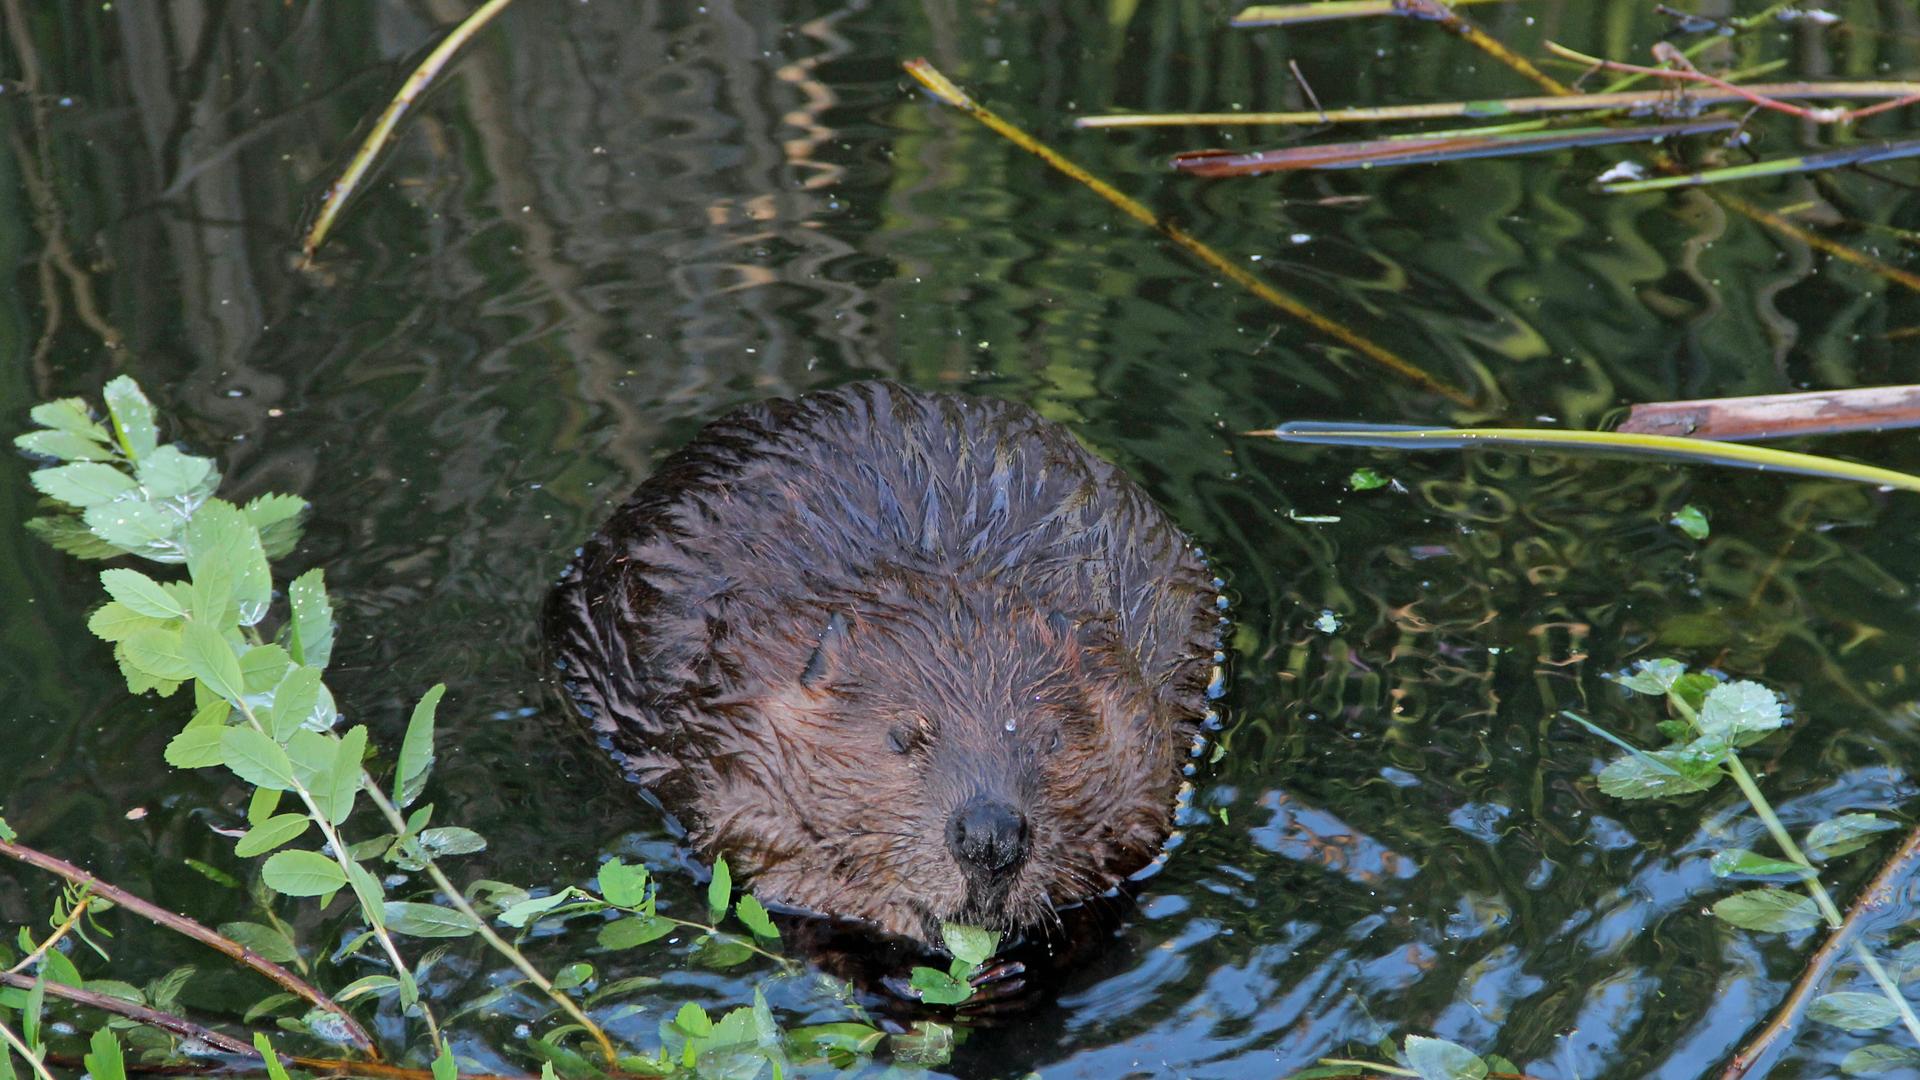 One of Vancouver's urban beavers.